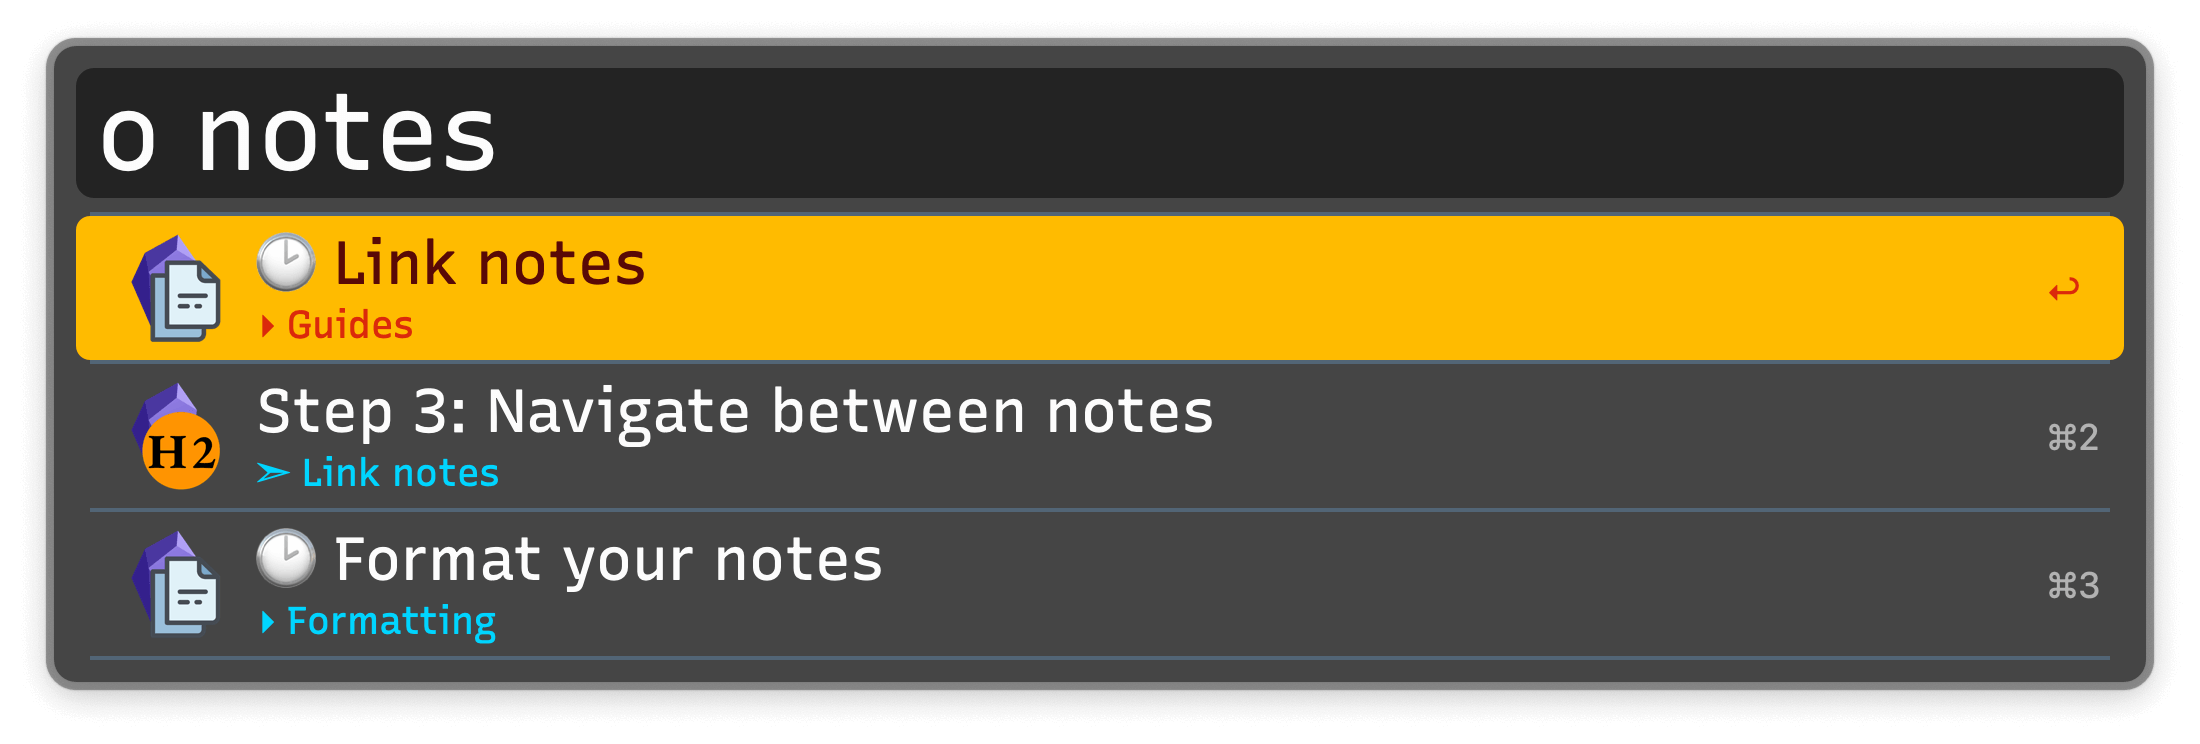 Searching notes